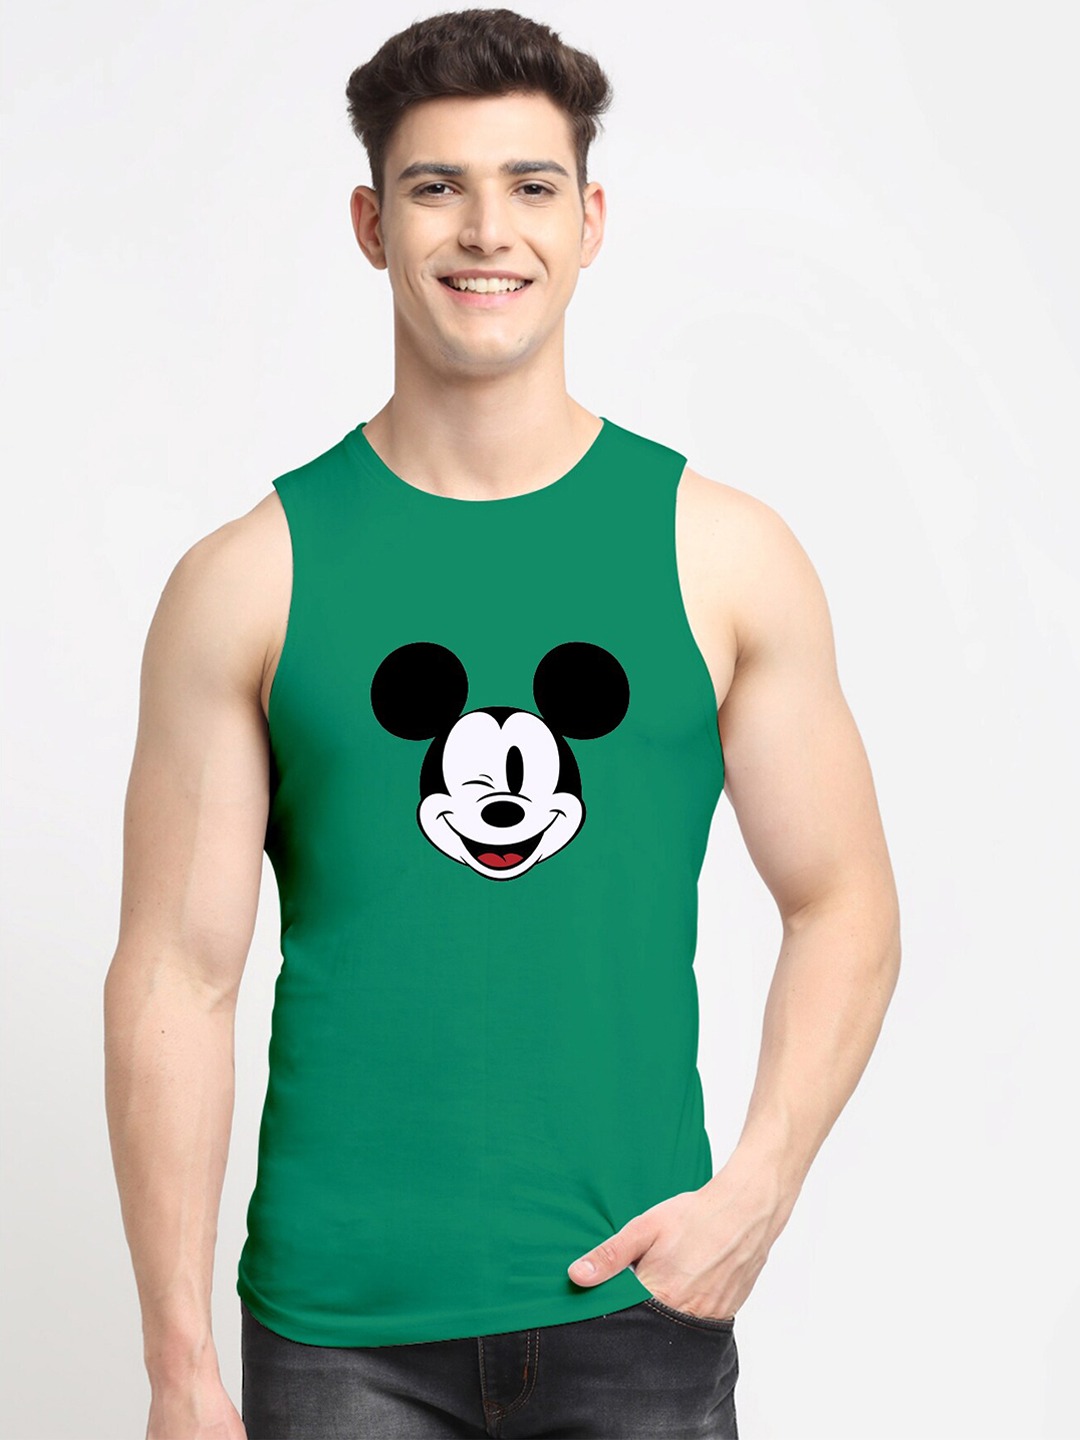 Clothing Innerwear Vests | Friskers Men Green & White Printed Pure Cotton Gym Vest - SL52253